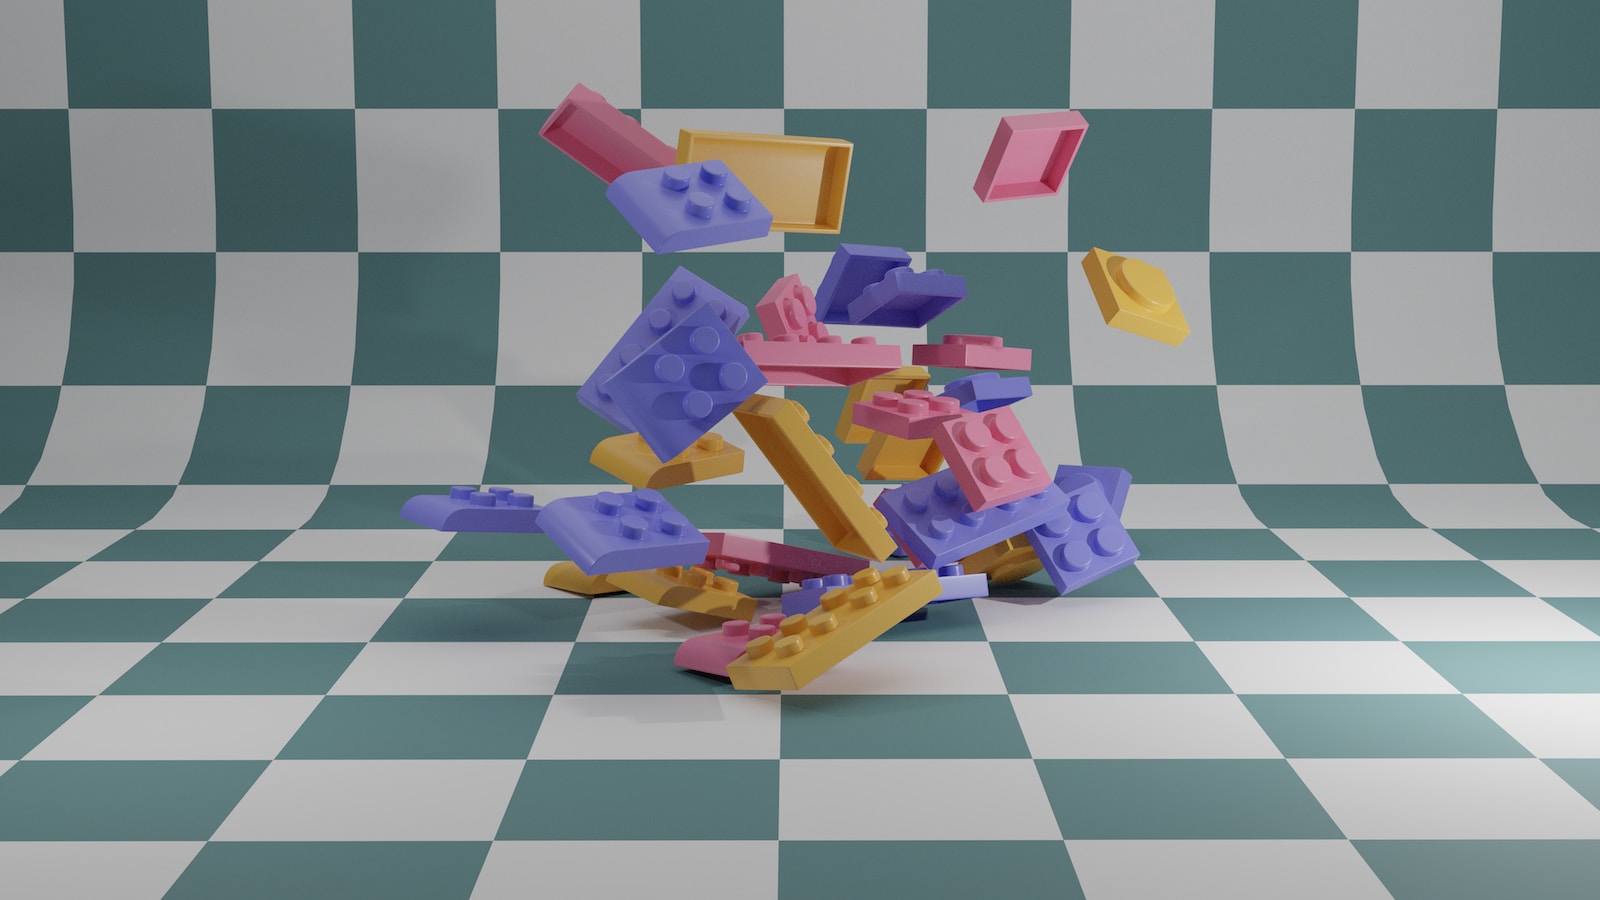 a pile of lego blocks on a checkered floor